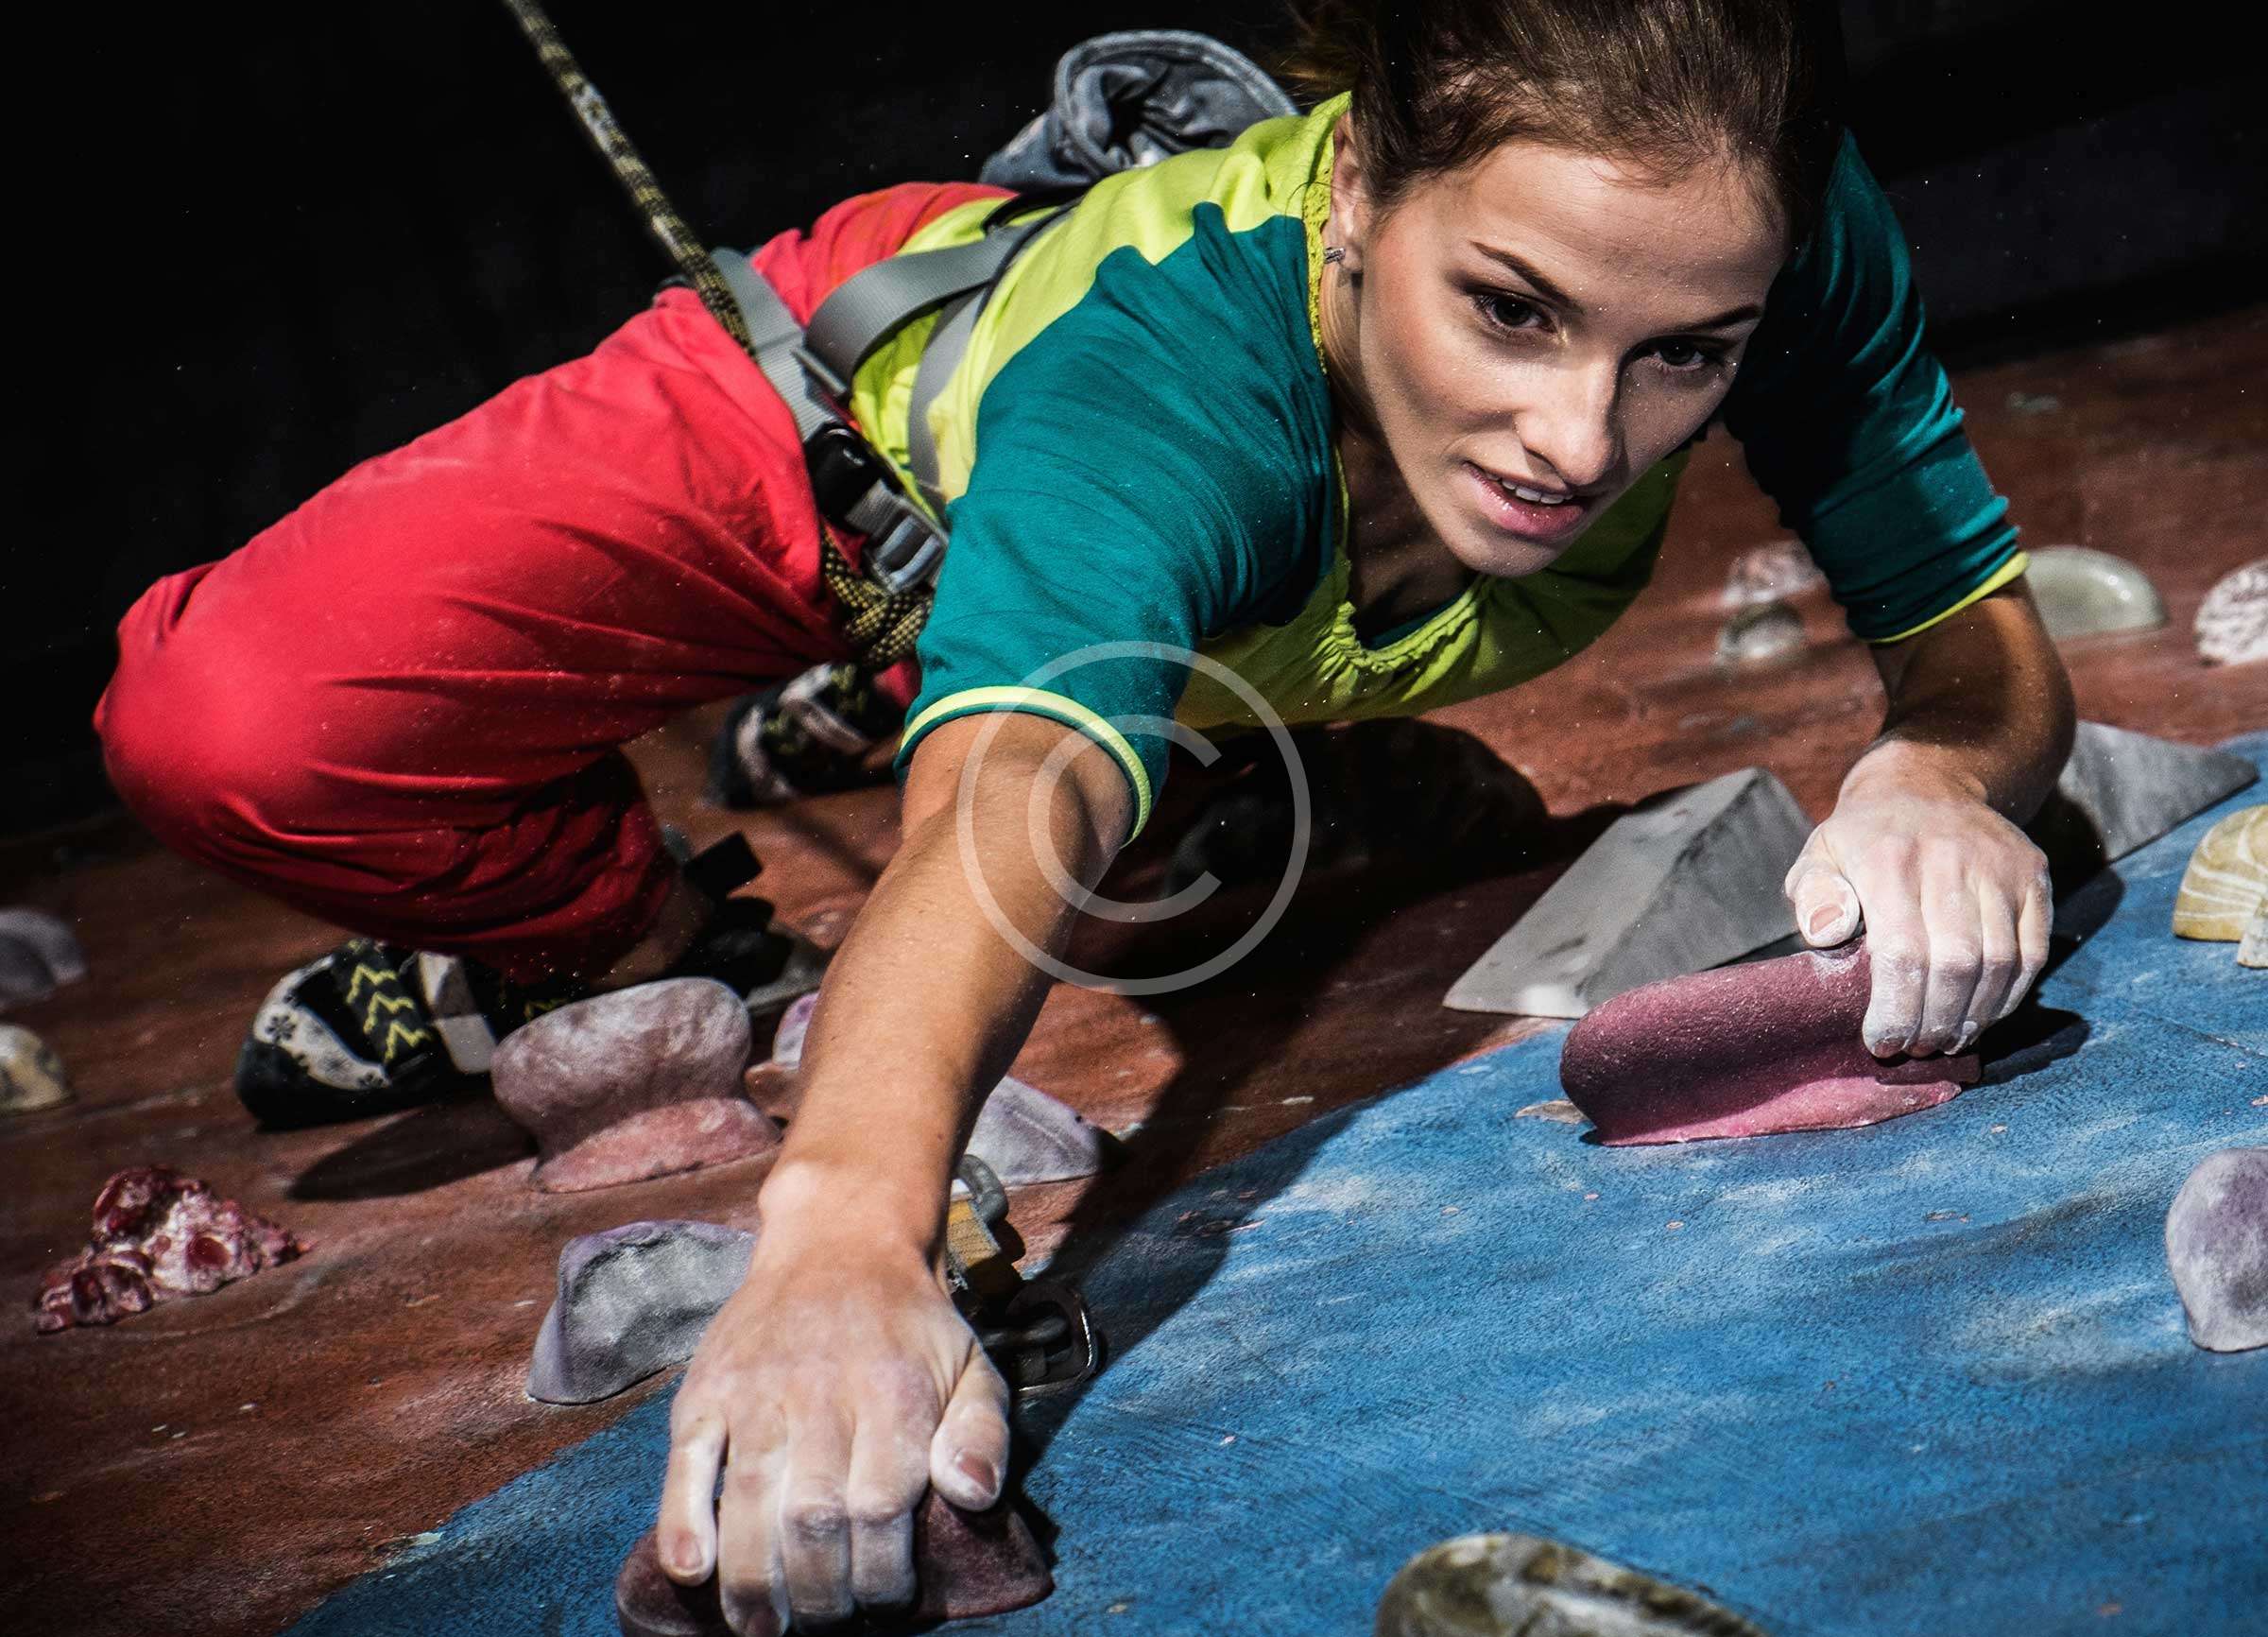 Free Climbing Tips: Why Get Stronger When You Can Get Better?